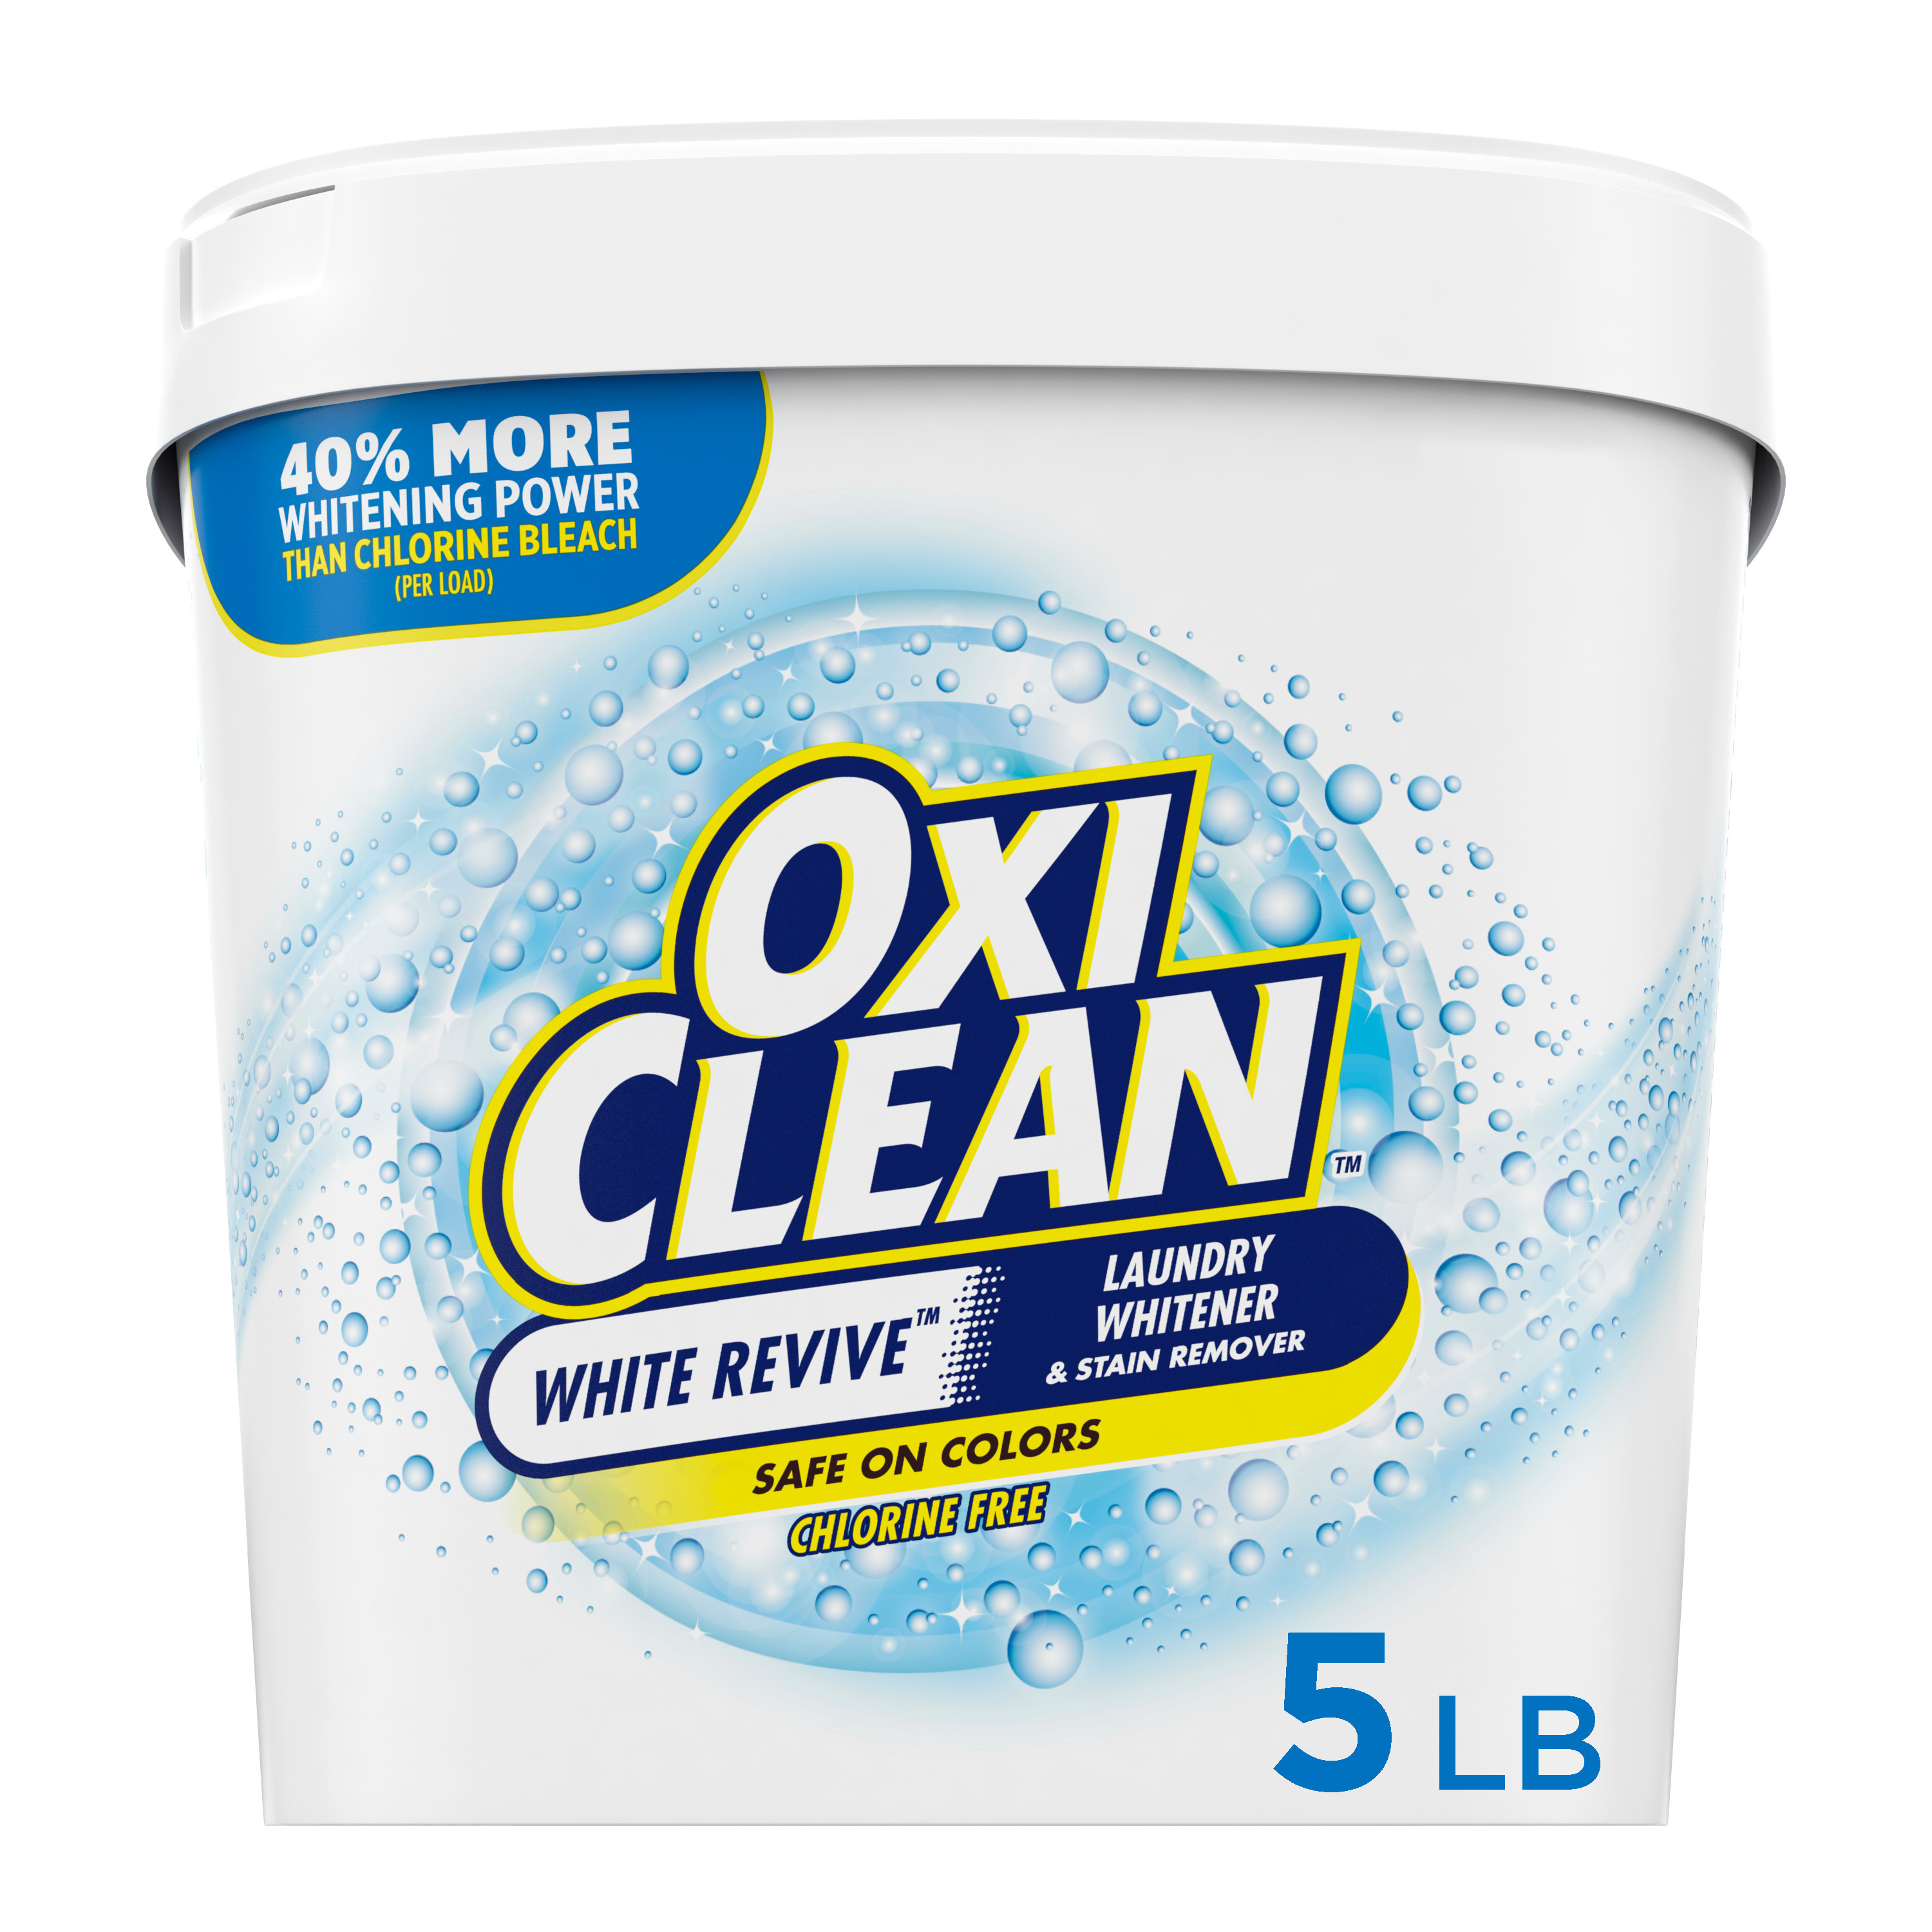 OxiClean White Revive Laundry Whitener and Stain Remover Powder, 5 lb - image 1 of 9